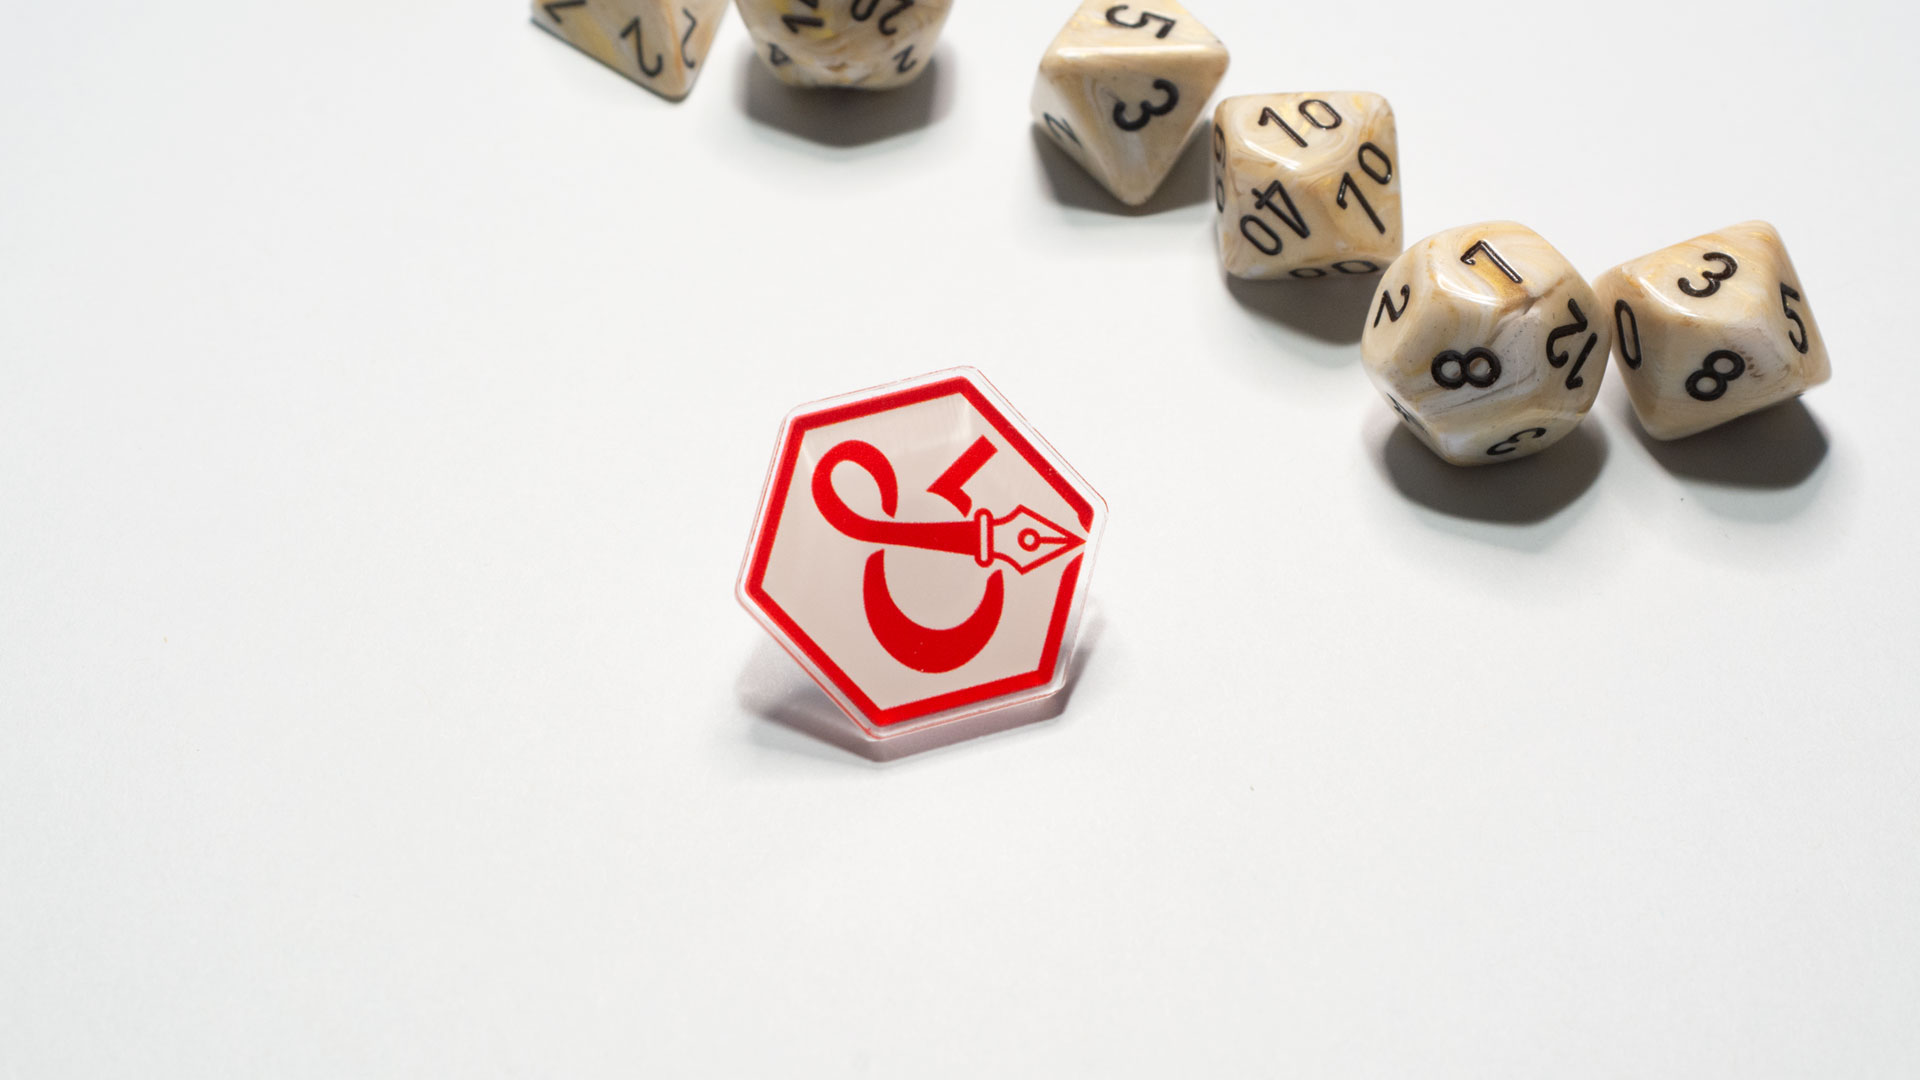 Acrylic pin of ampersand logo with dice behind it.